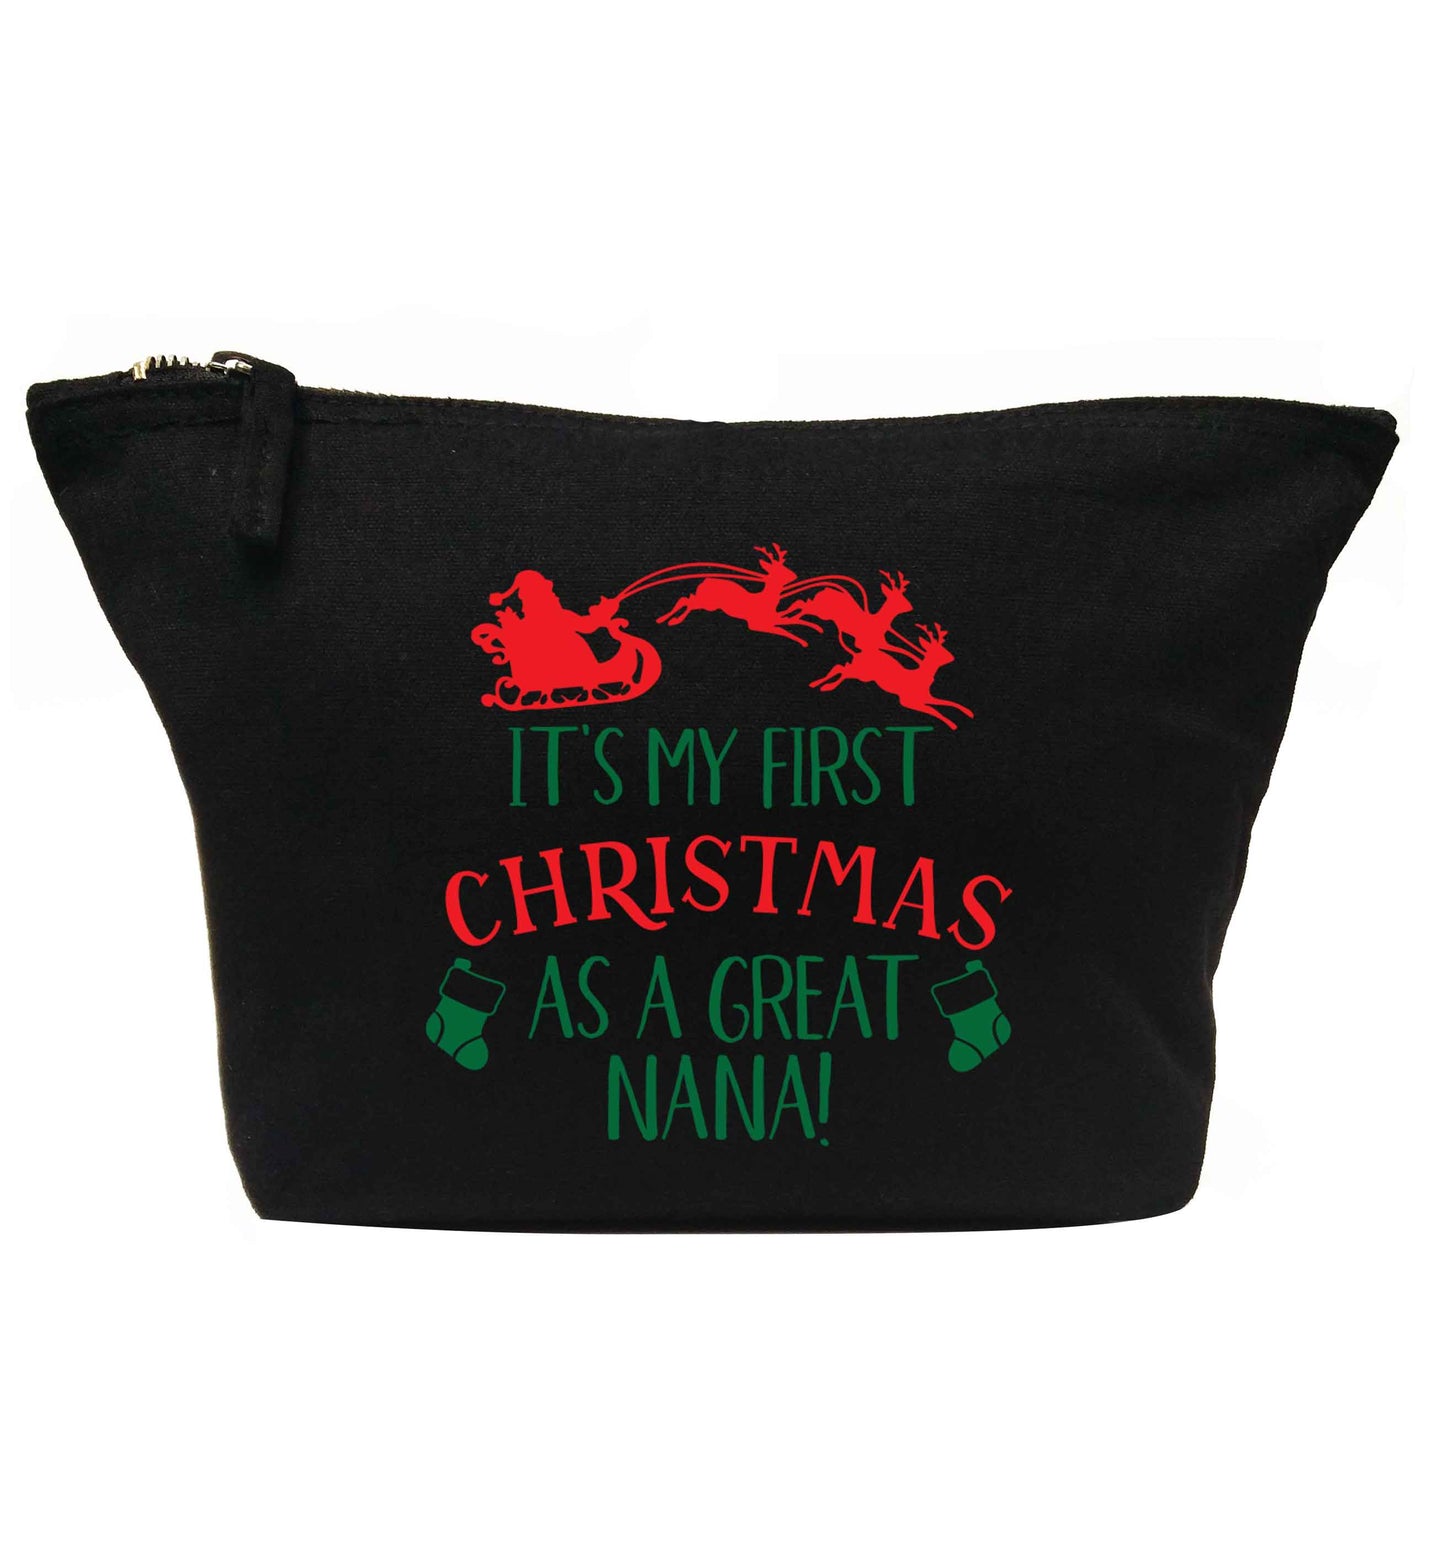 It's my first Christmas as a great nana! | makeup / wash bag